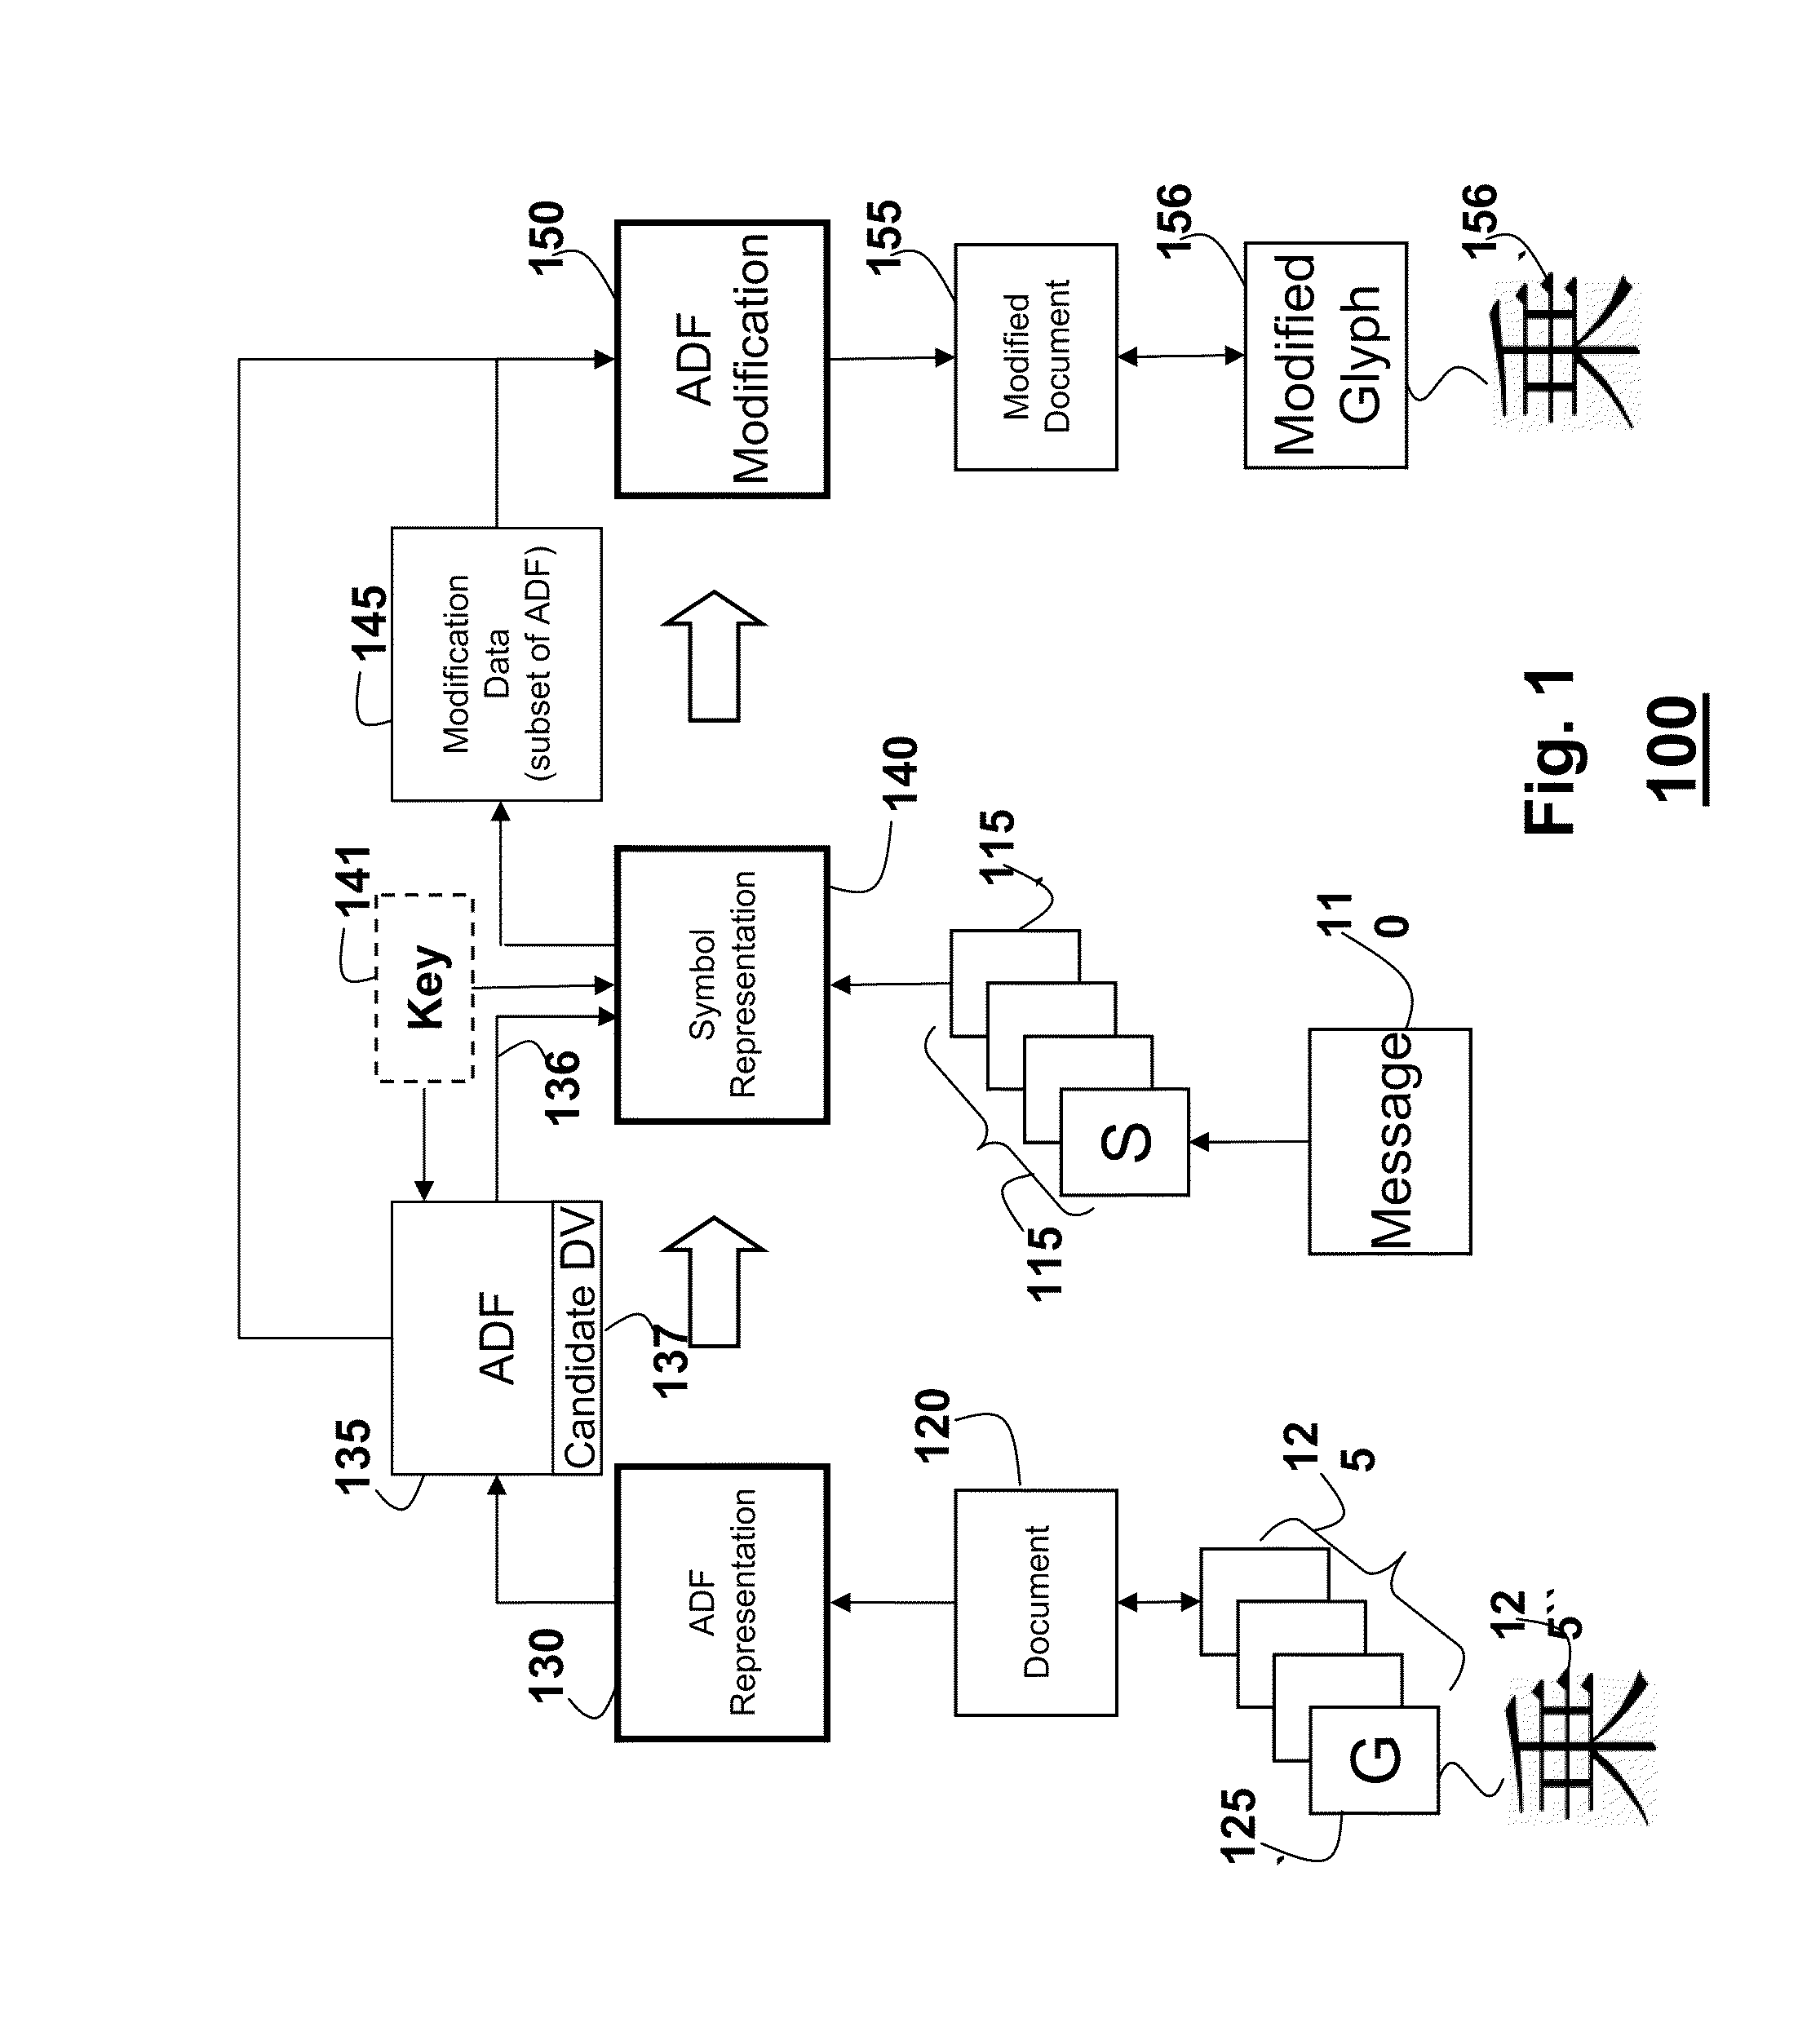 Method for Embedding Messages into Documents Using Distance Fields